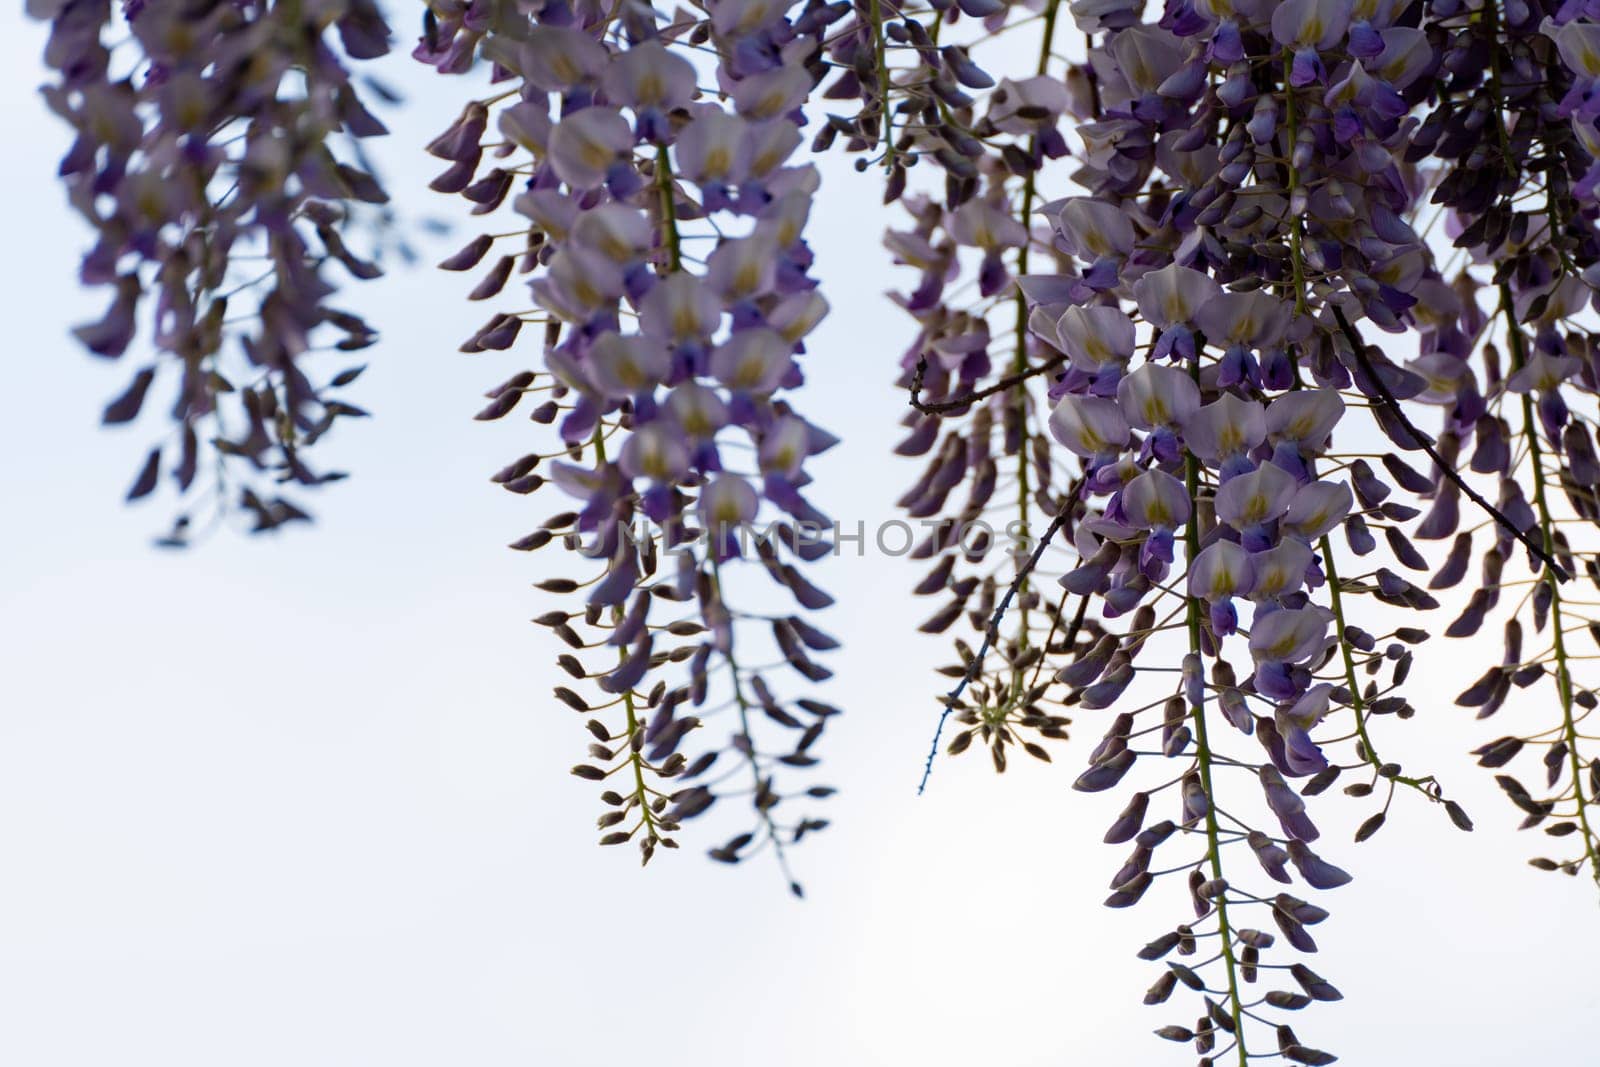 Blooming Wisteria Sinensis with classic purple flowers in full bloom in drooping racemes against the sky. Garden with wisteria in spring. by Matiunina